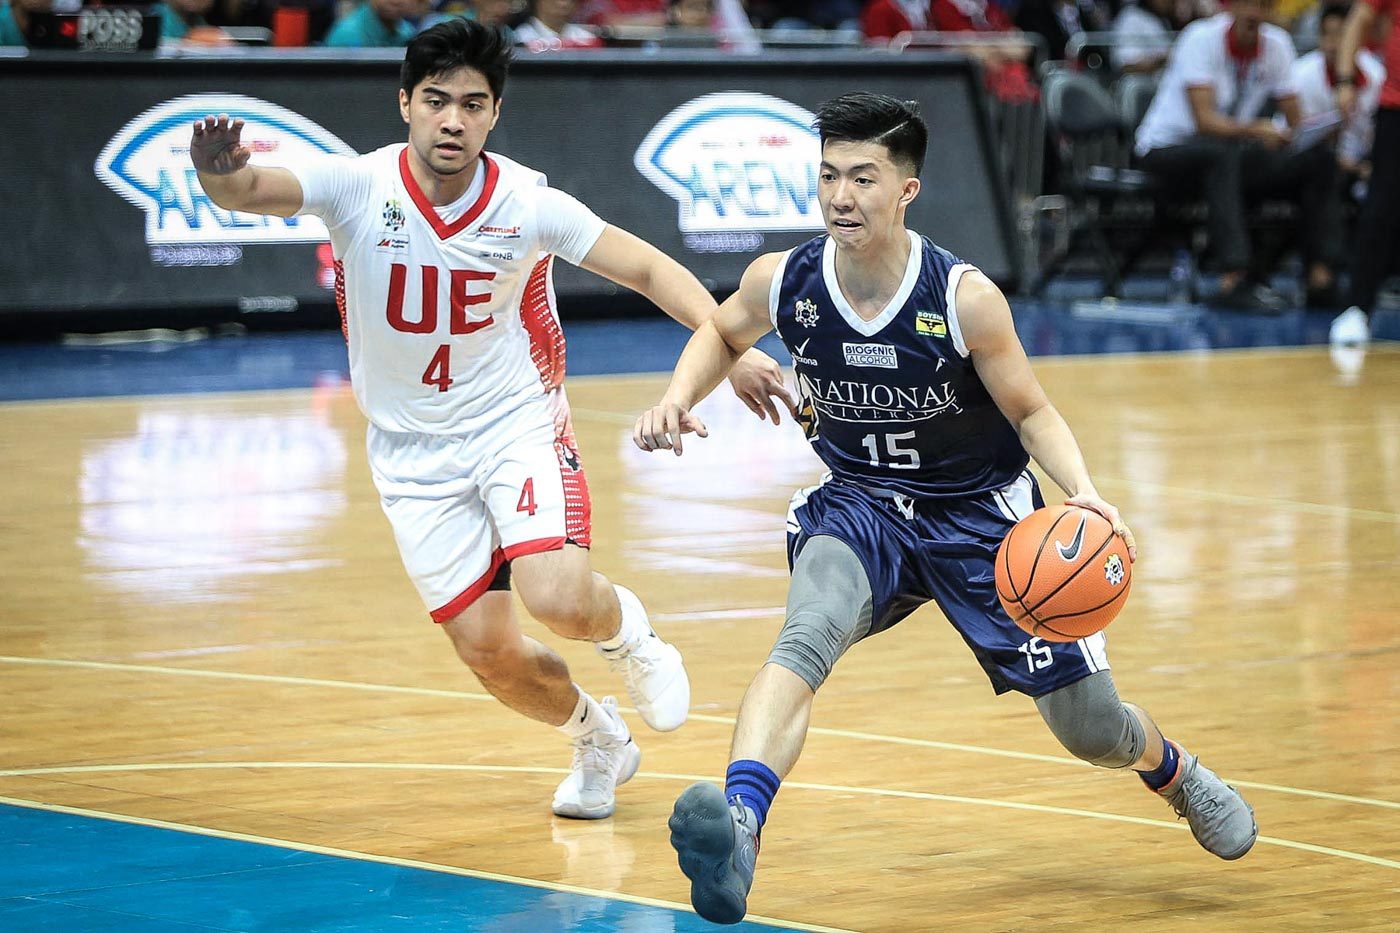 NU veterans glue team together for 2nd round charge